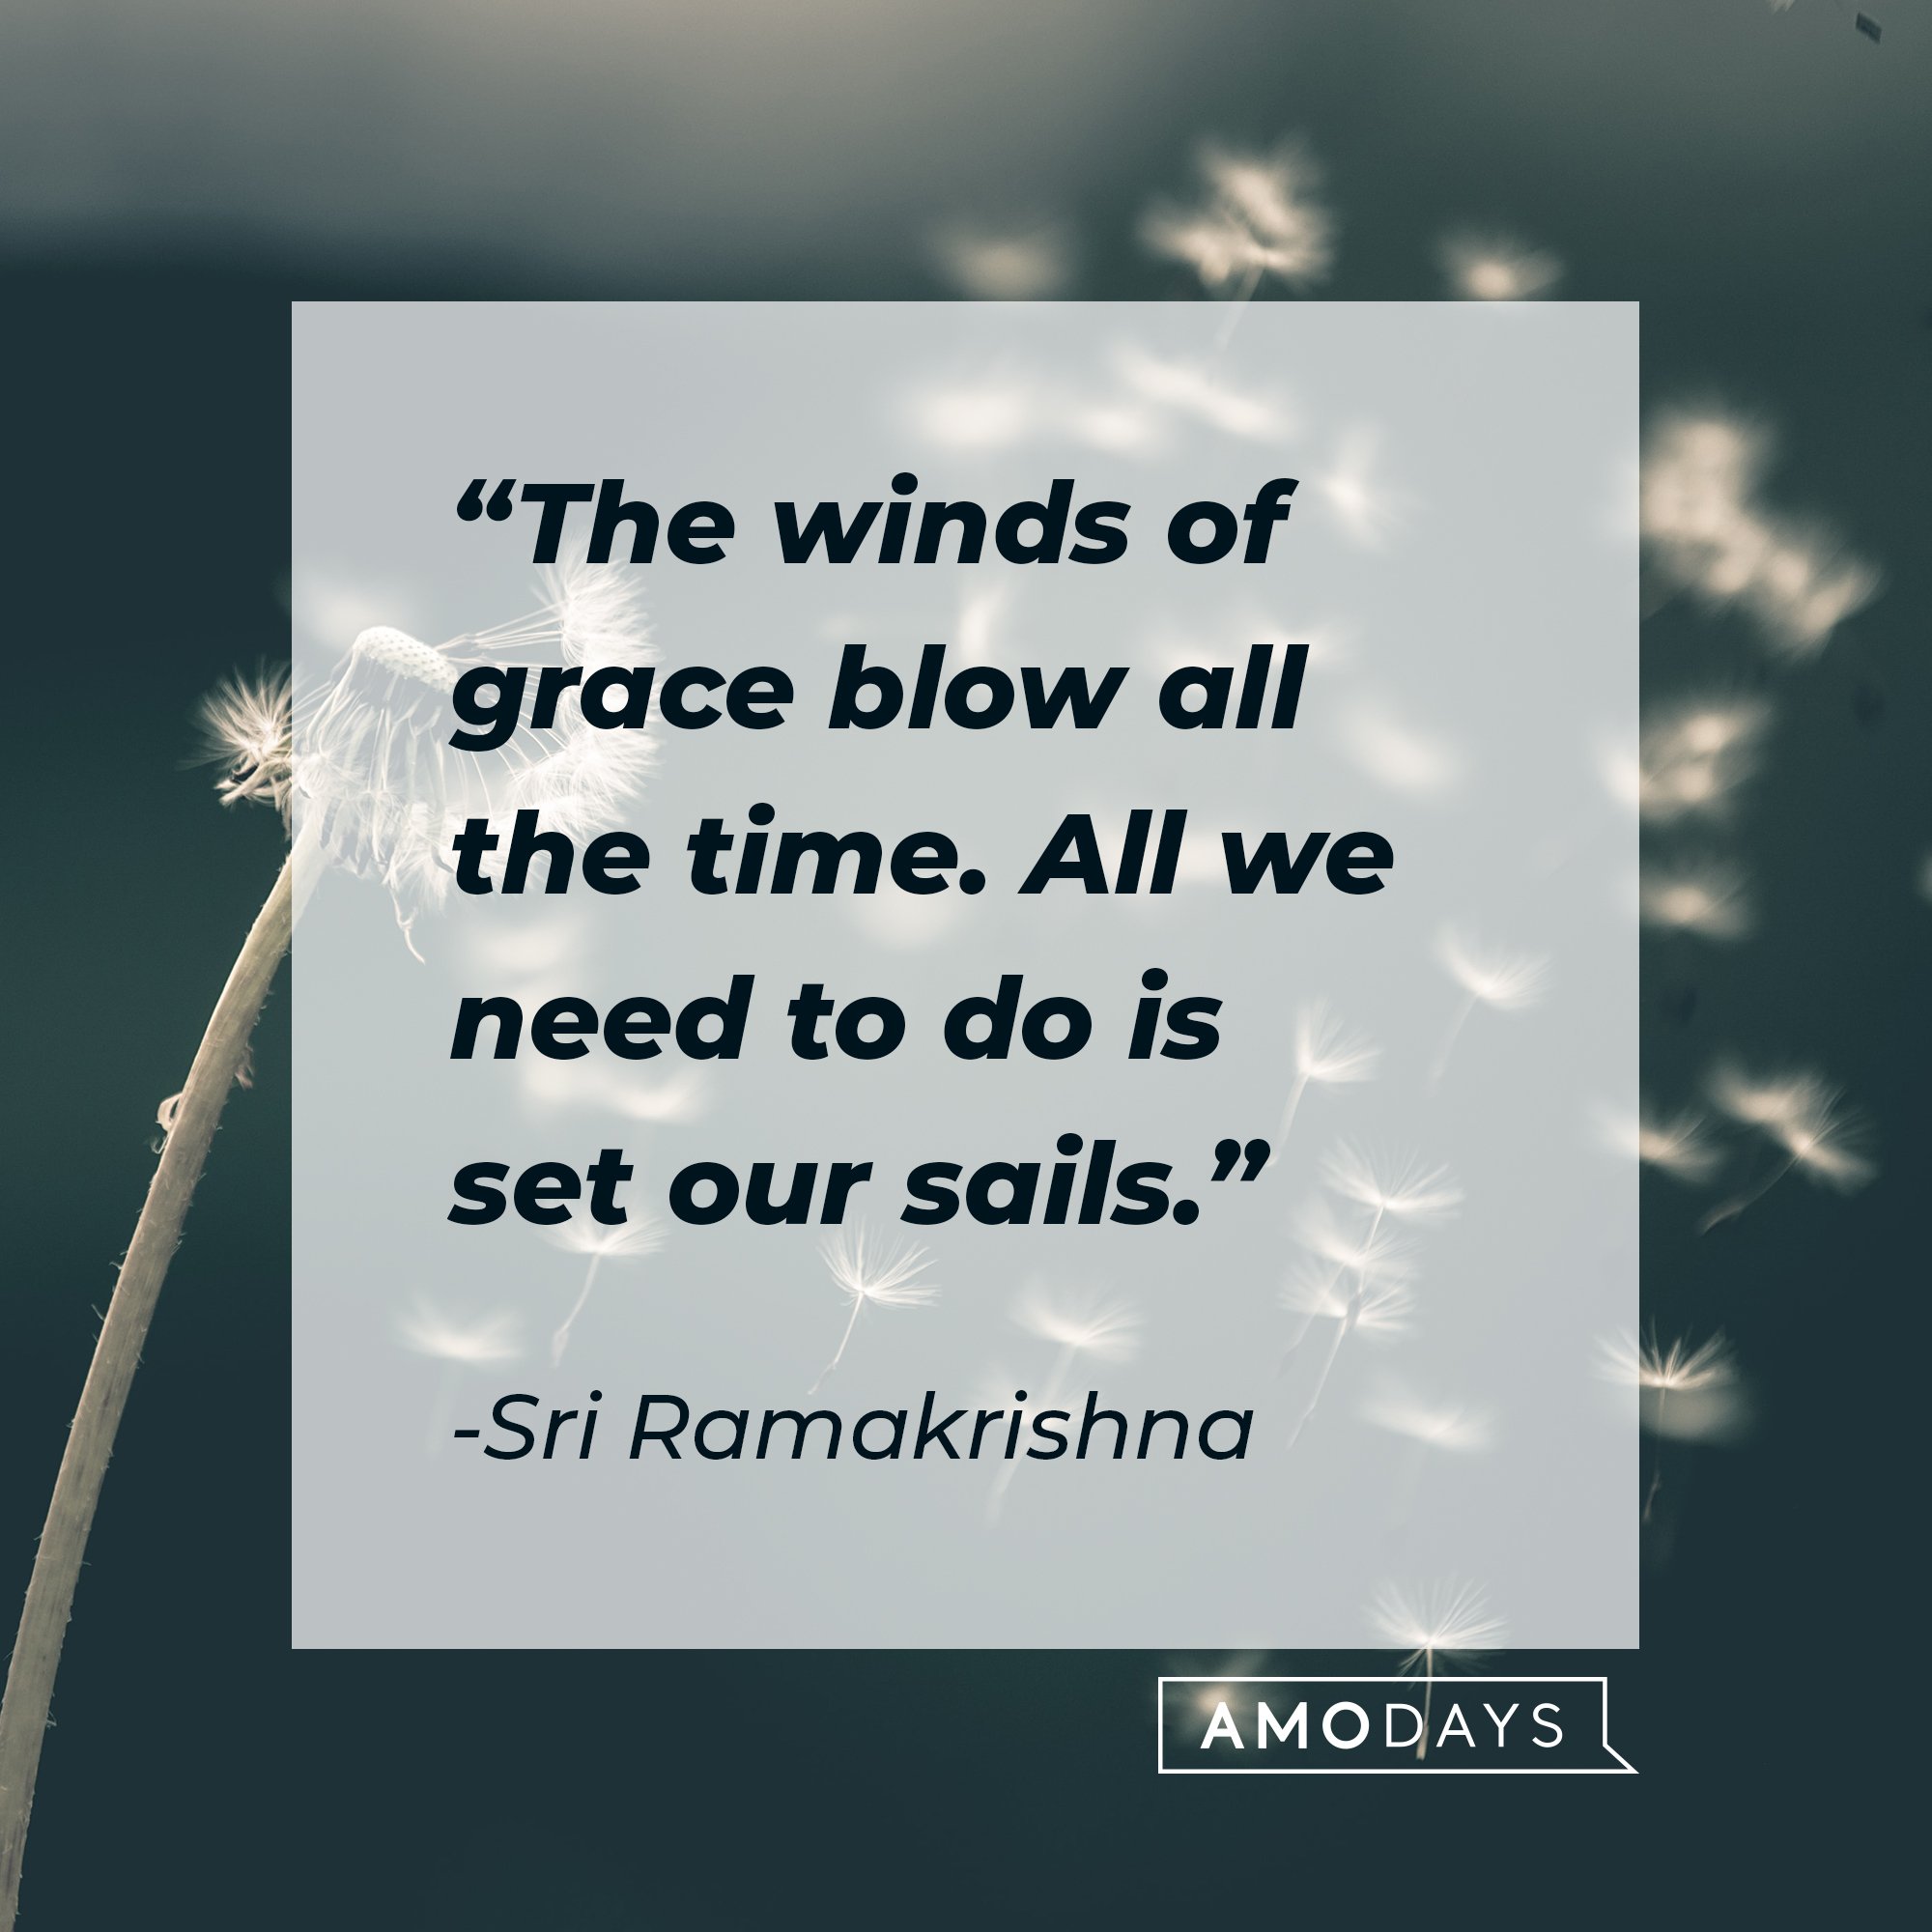 Sri Ramakrishna's quote: "The winds of grace blow all the time. All we need to do is set our sails." | Image: AmoDays